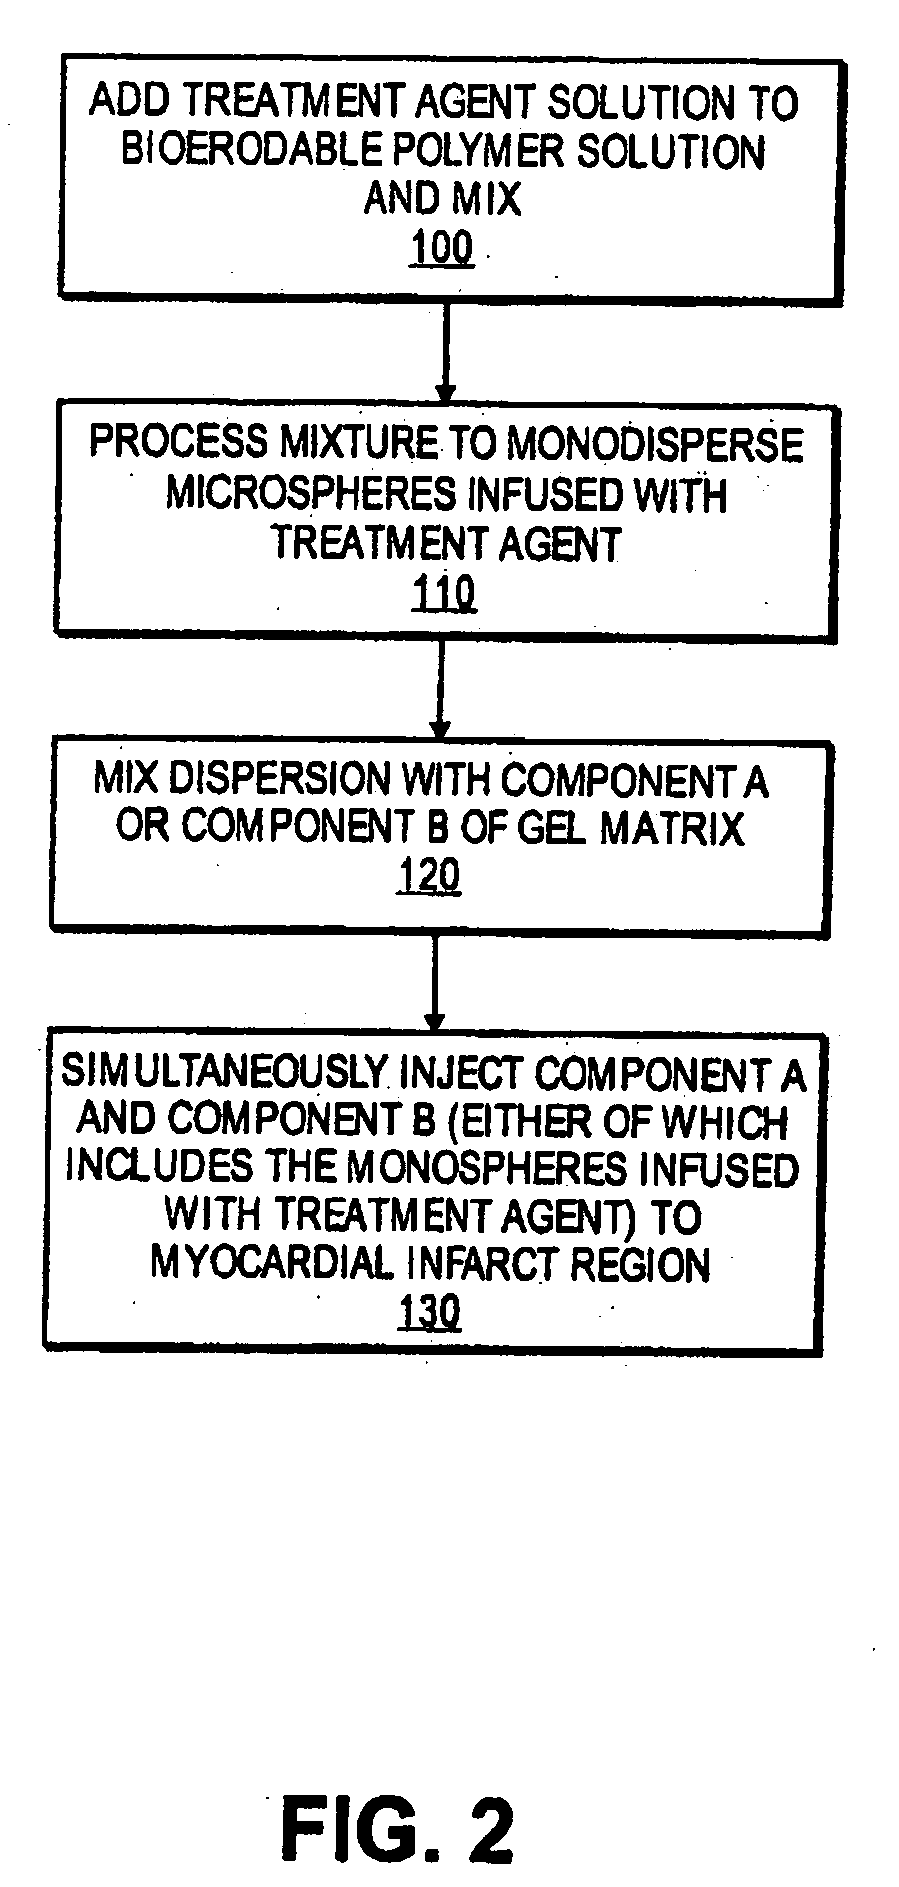 Methods and compositions for treating post-cardial infarction damage